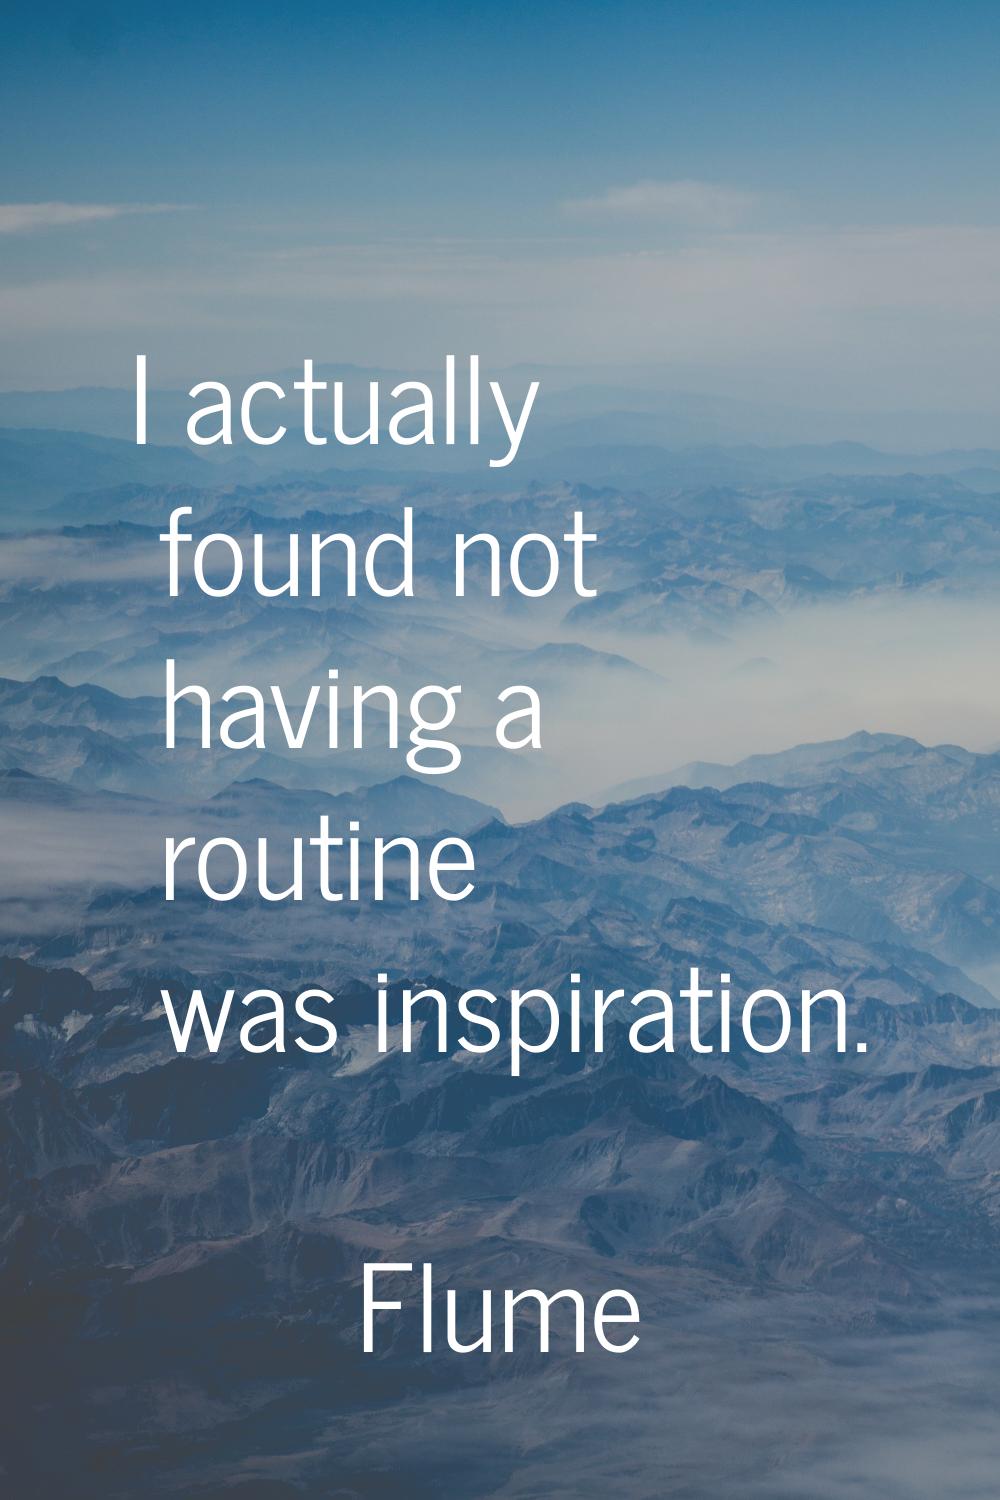 I actually found not having a routine was inspiration.